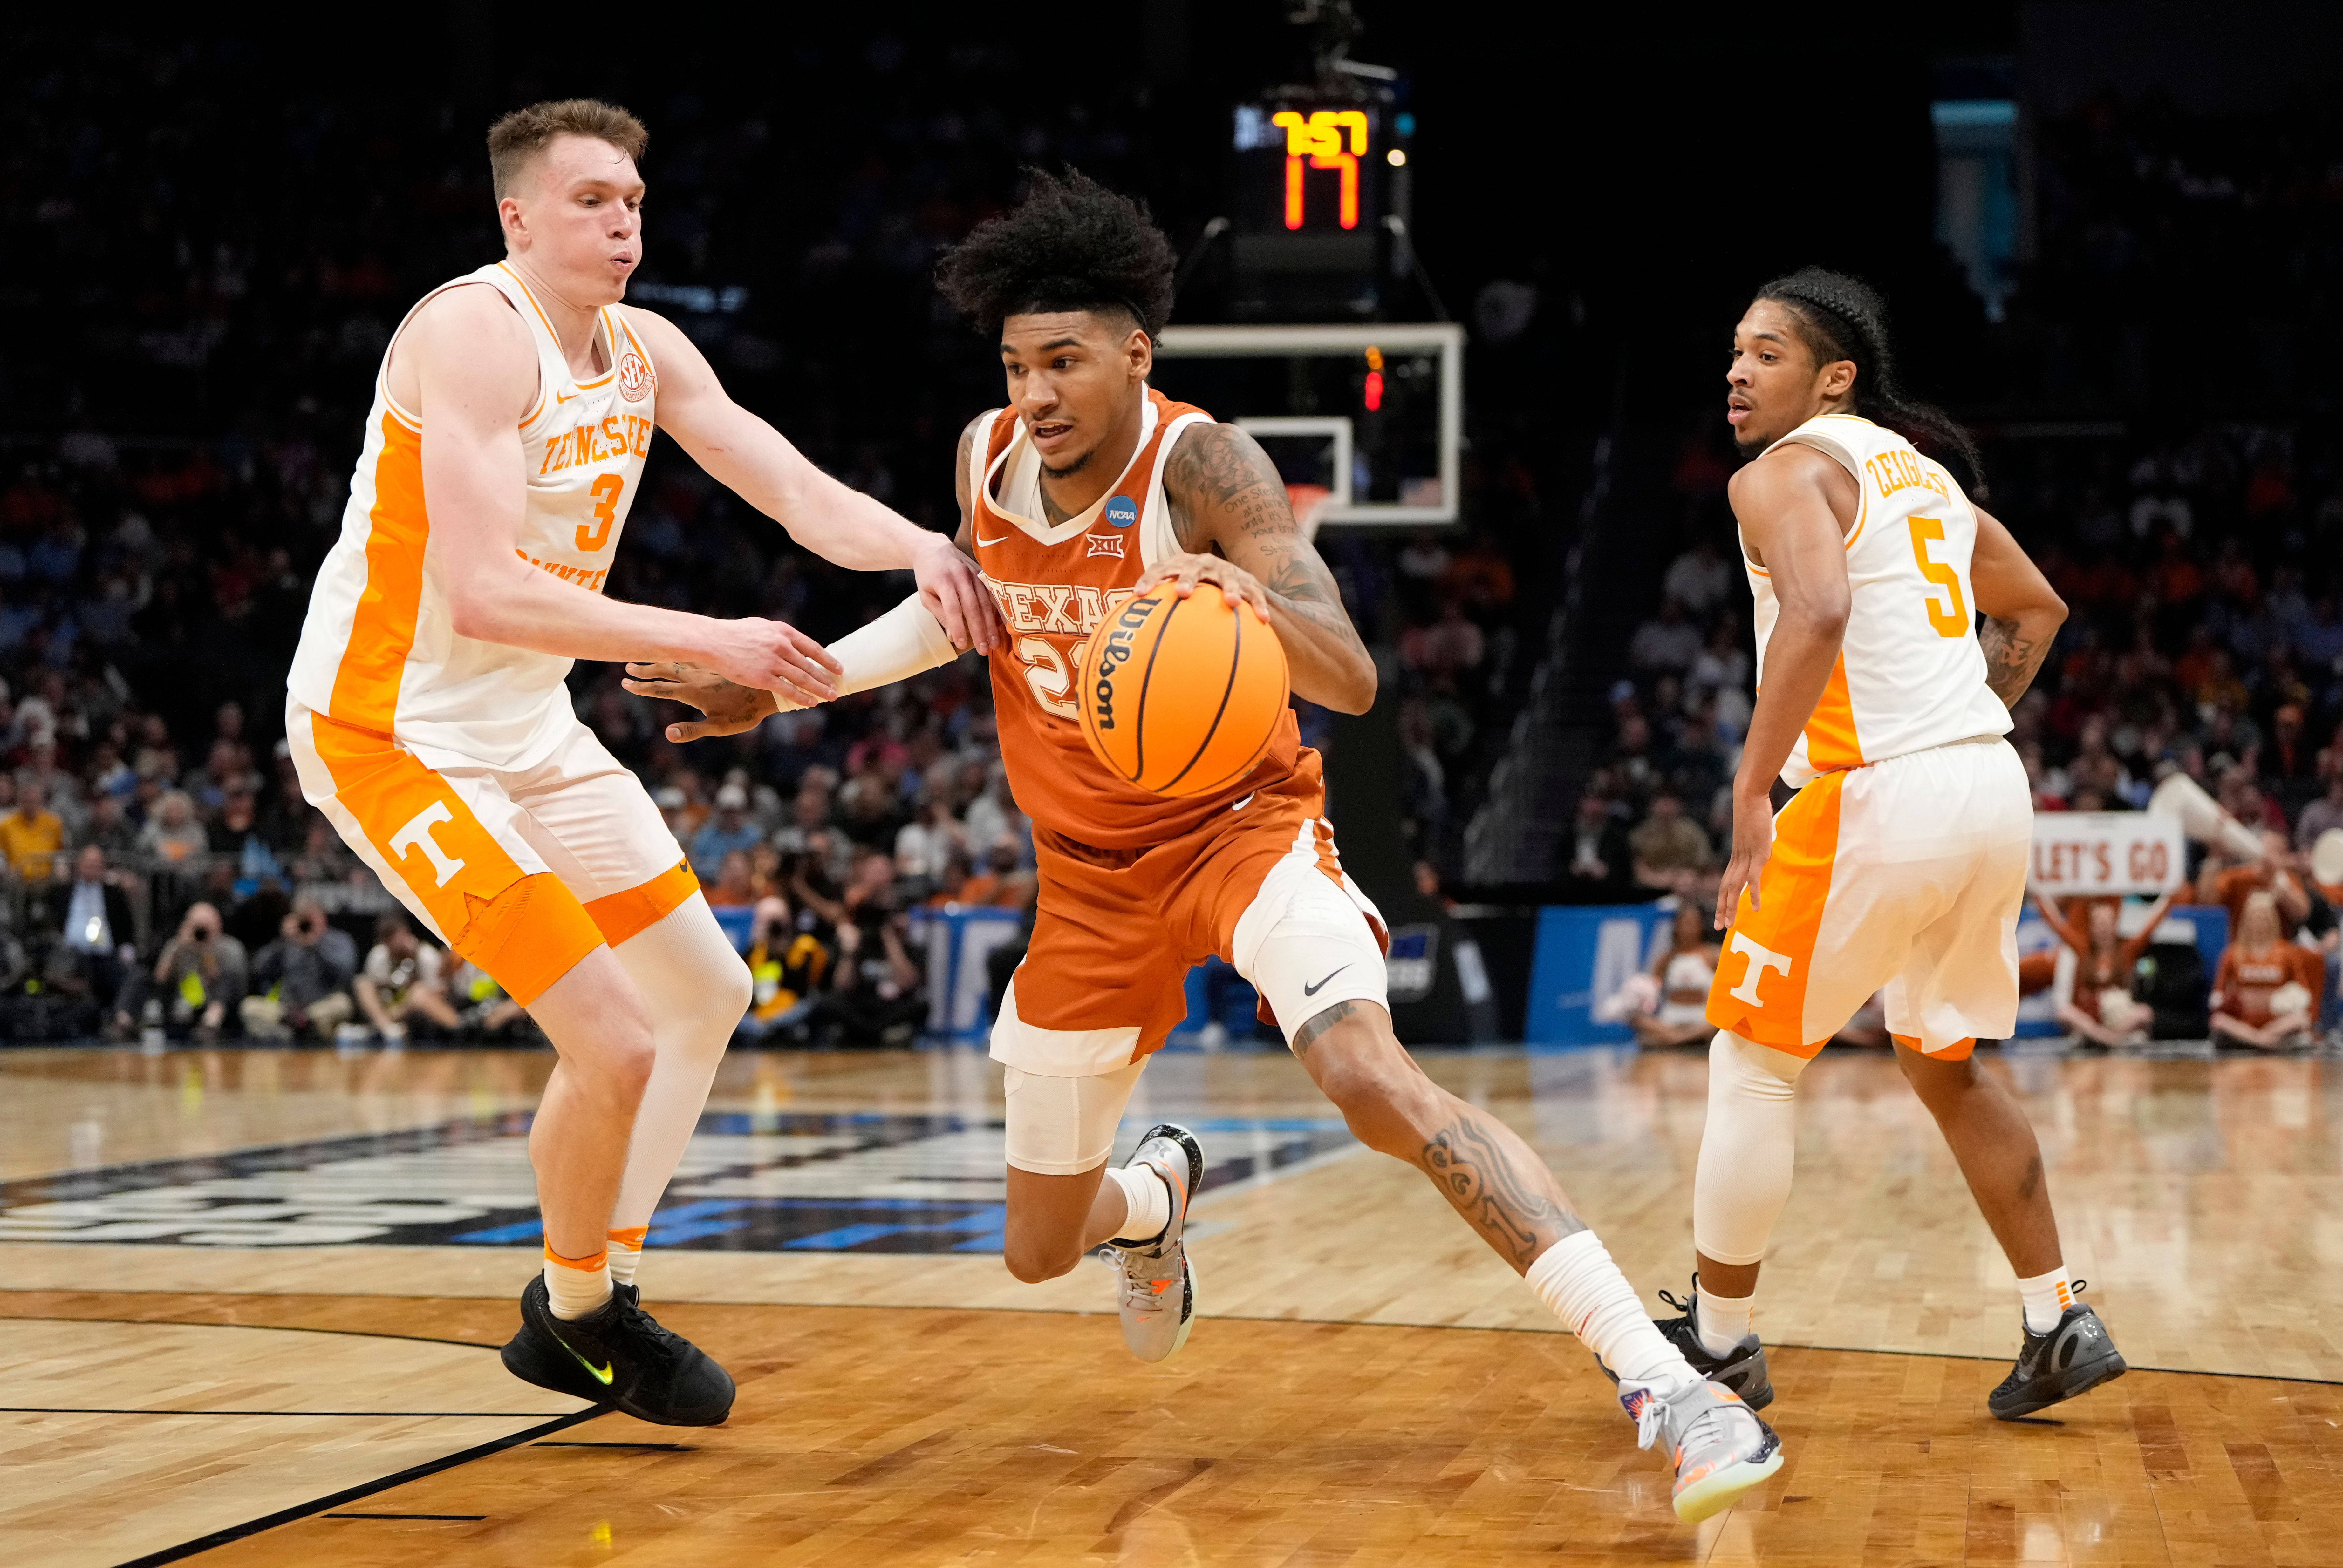 Dillon Mitchell played well as a power forward for Texas last season. He averaged 9.6 ppg and 7.5 rpg while shooting 58.5% from the field.